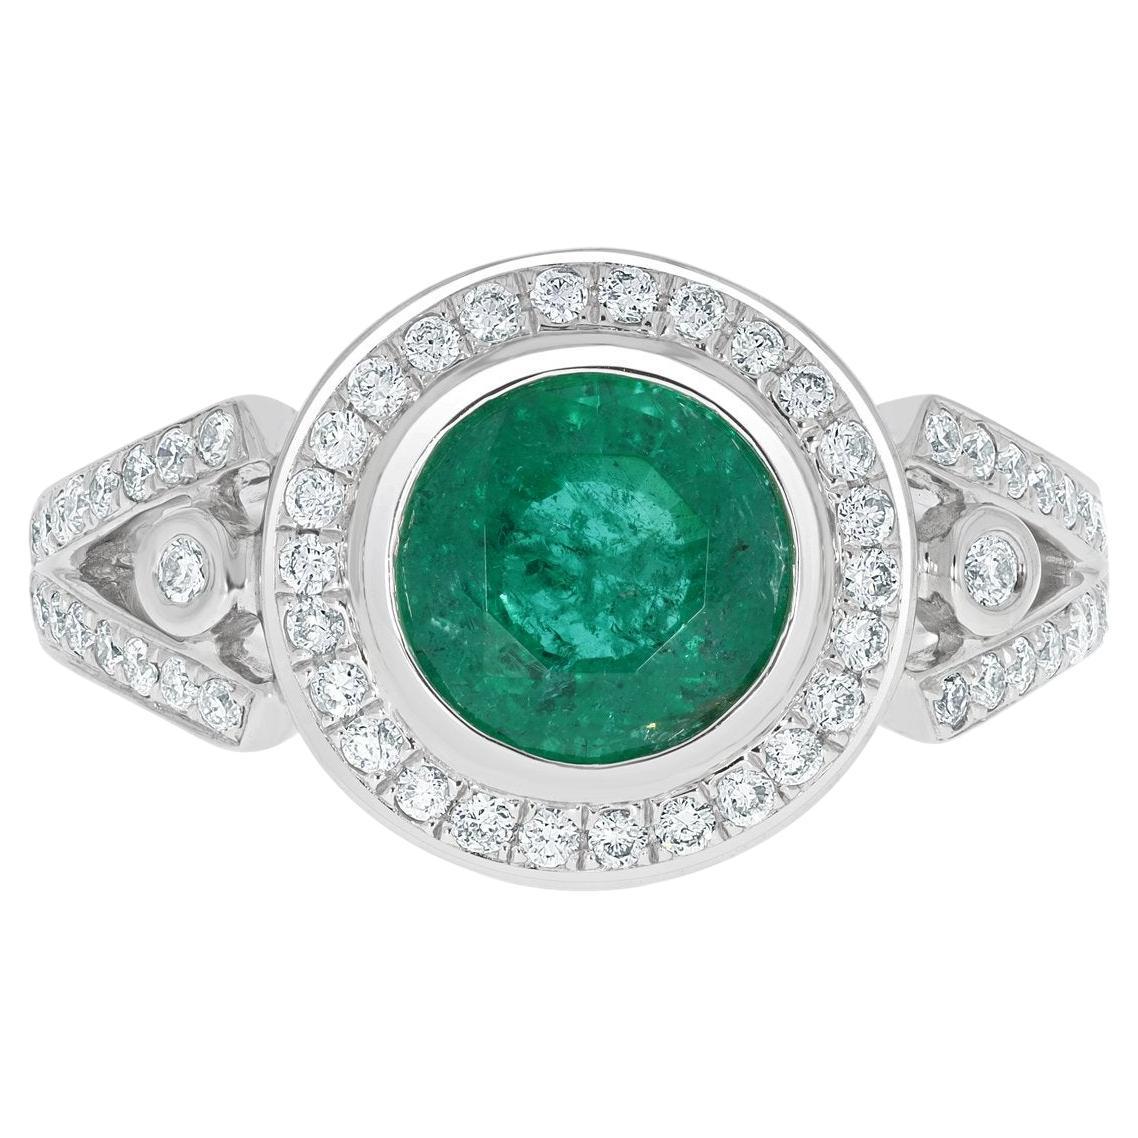 1.49ct Emerald Rings with 0.40Tct Diamonds Set in 14k White Gold